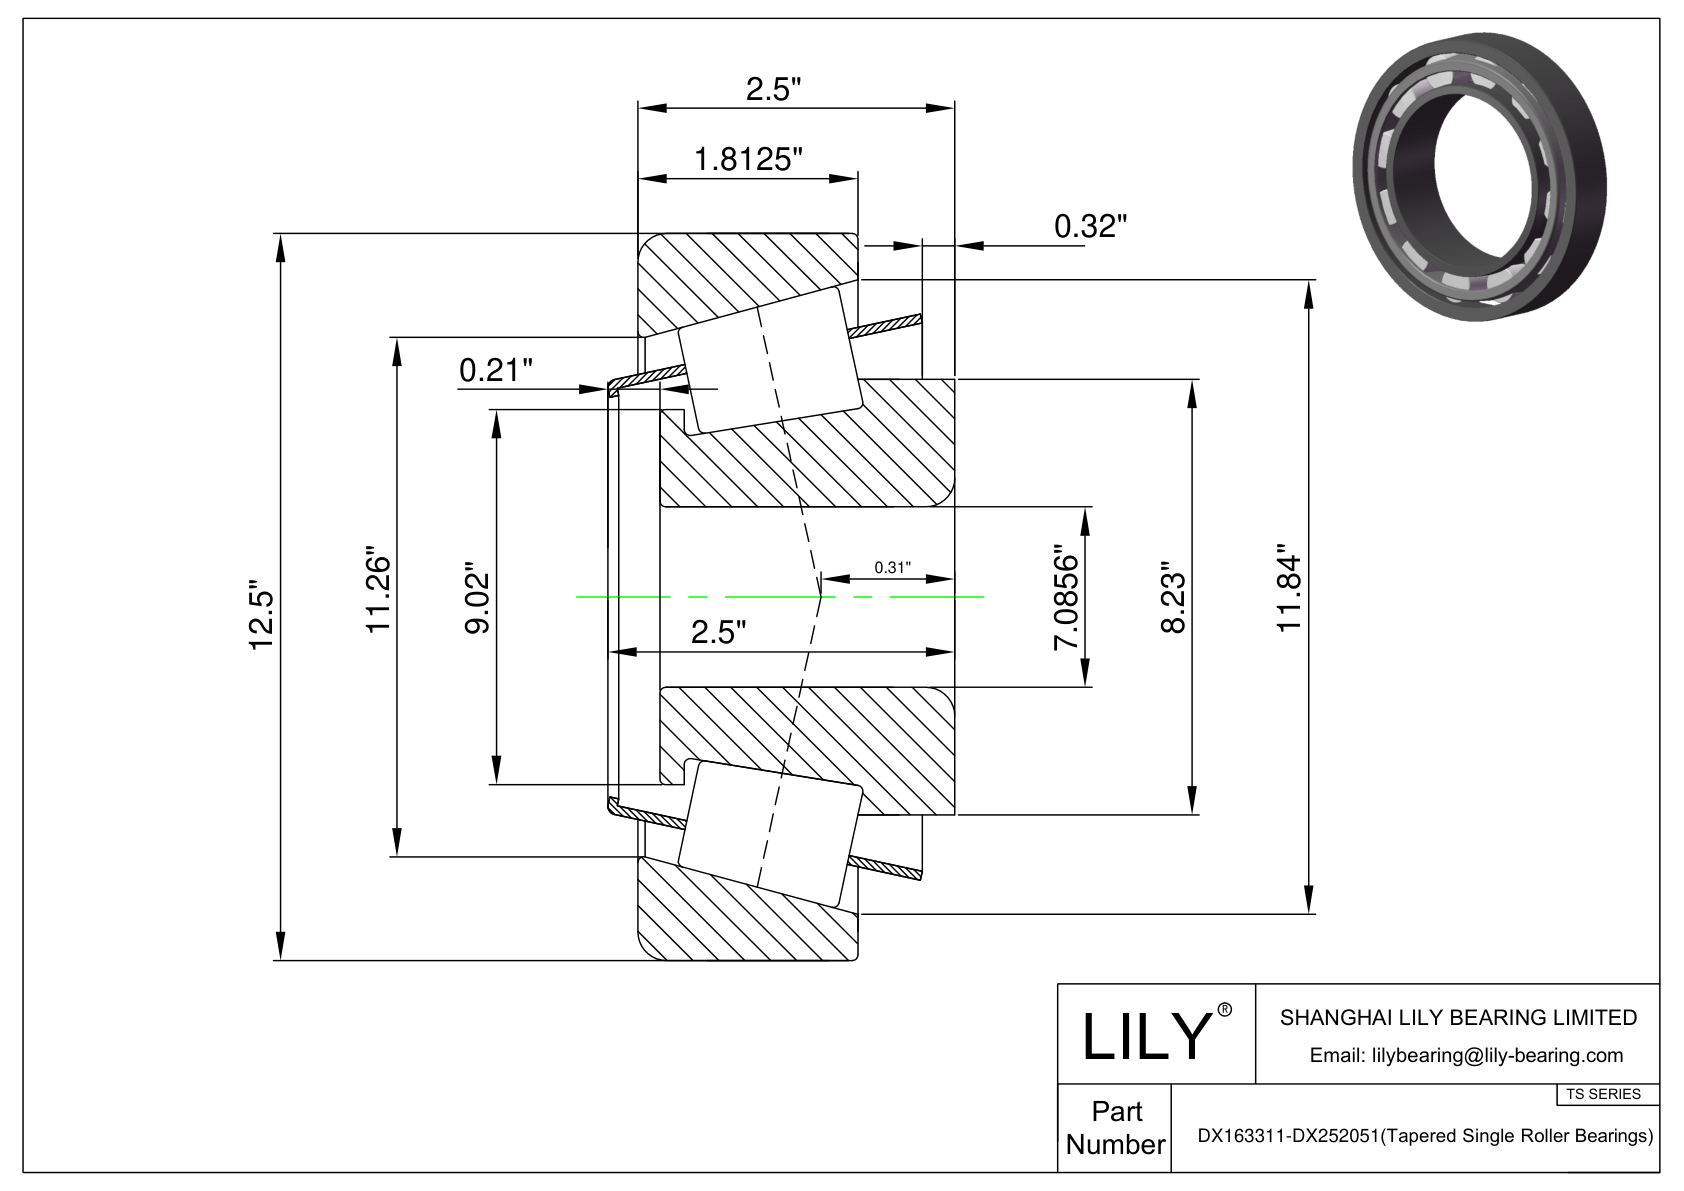 DX163311-DX252051 TS (Tapered Single Roller Bearings) (Imperial) cad drawing